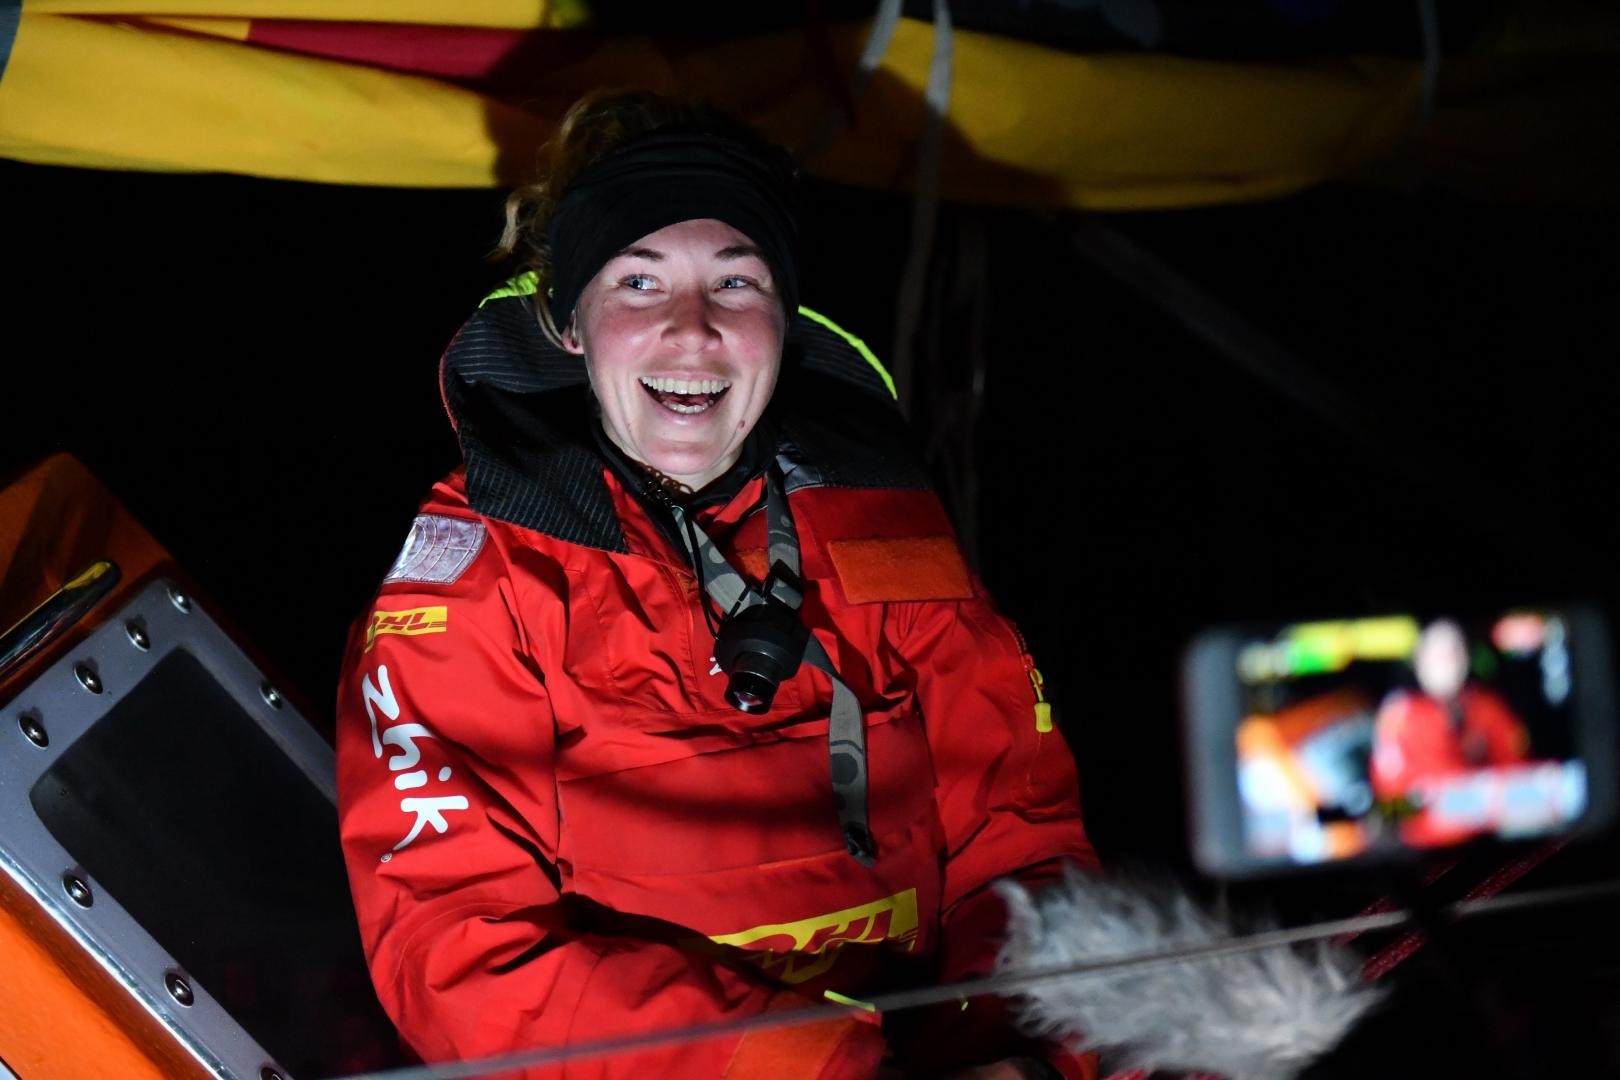 Susie Goodall in good form last night after arriving at the Hobart pit-stop in 4th place